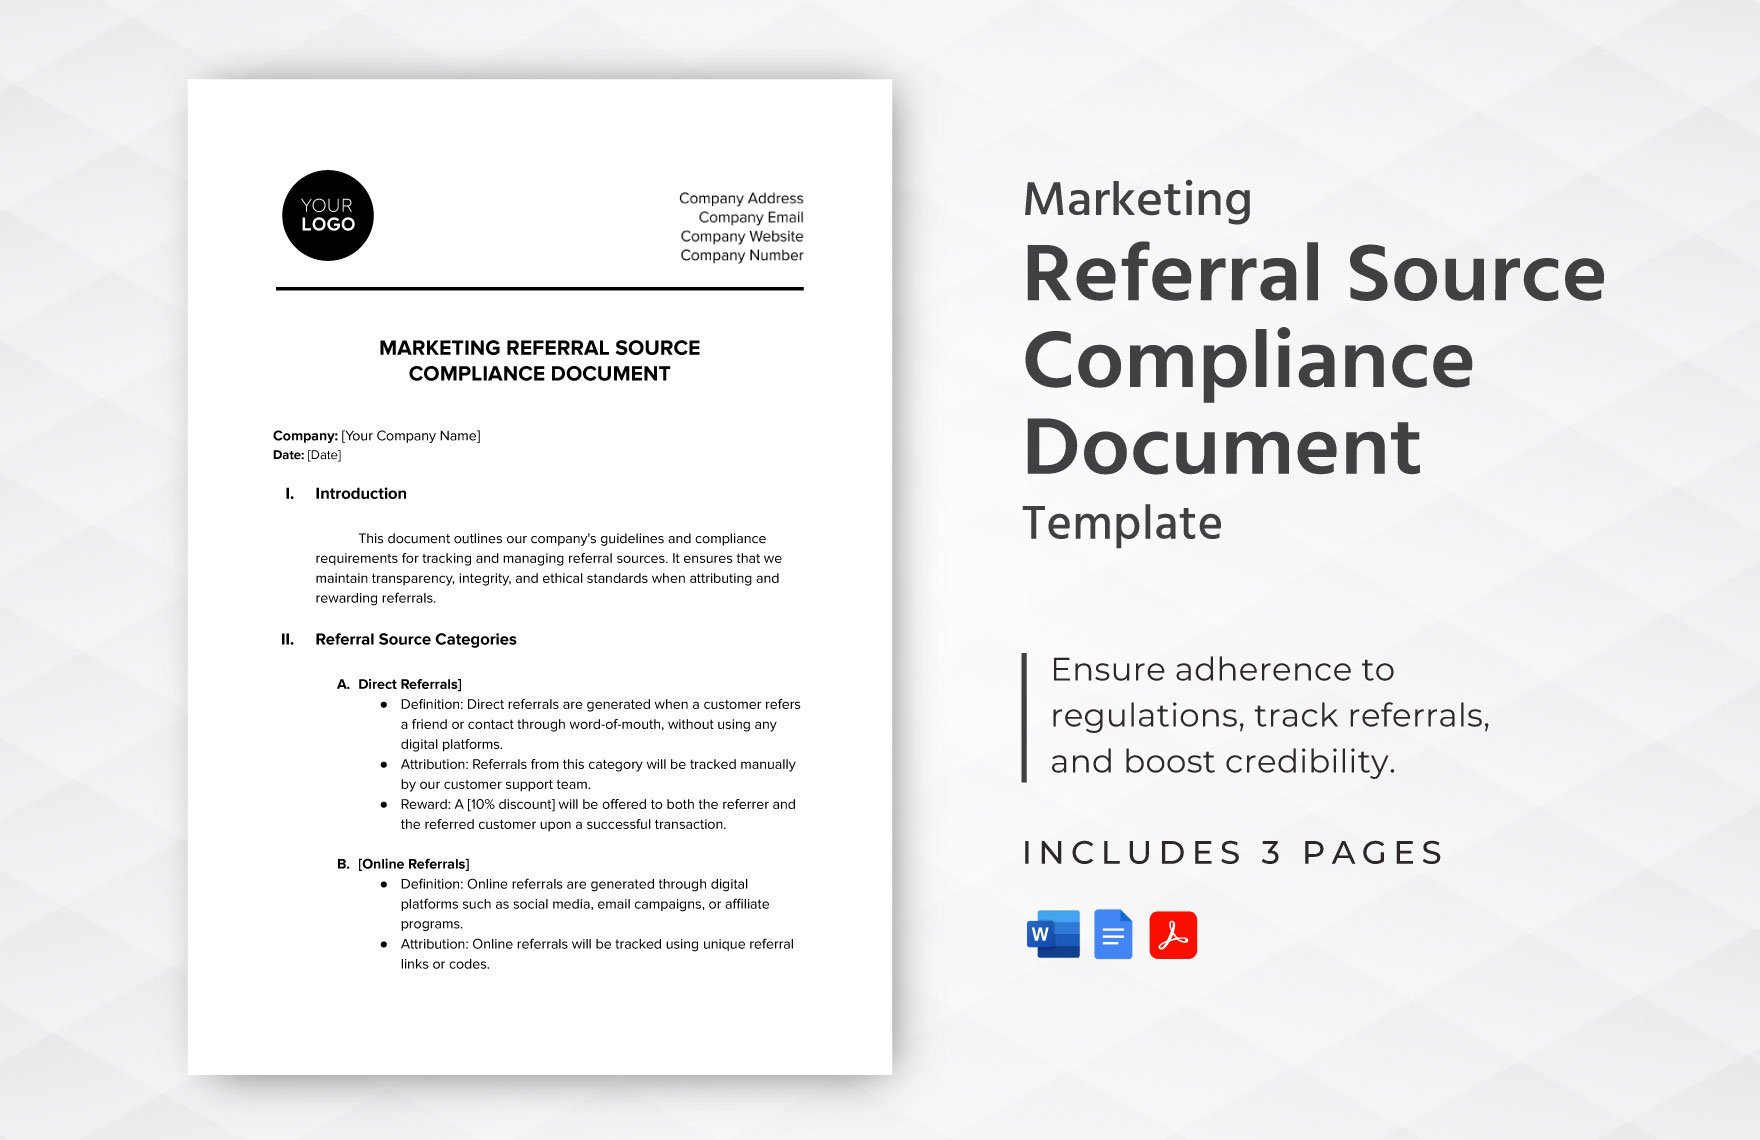 Marketing Referral Source Compliance Document Template in Word, Google Docs, PDF